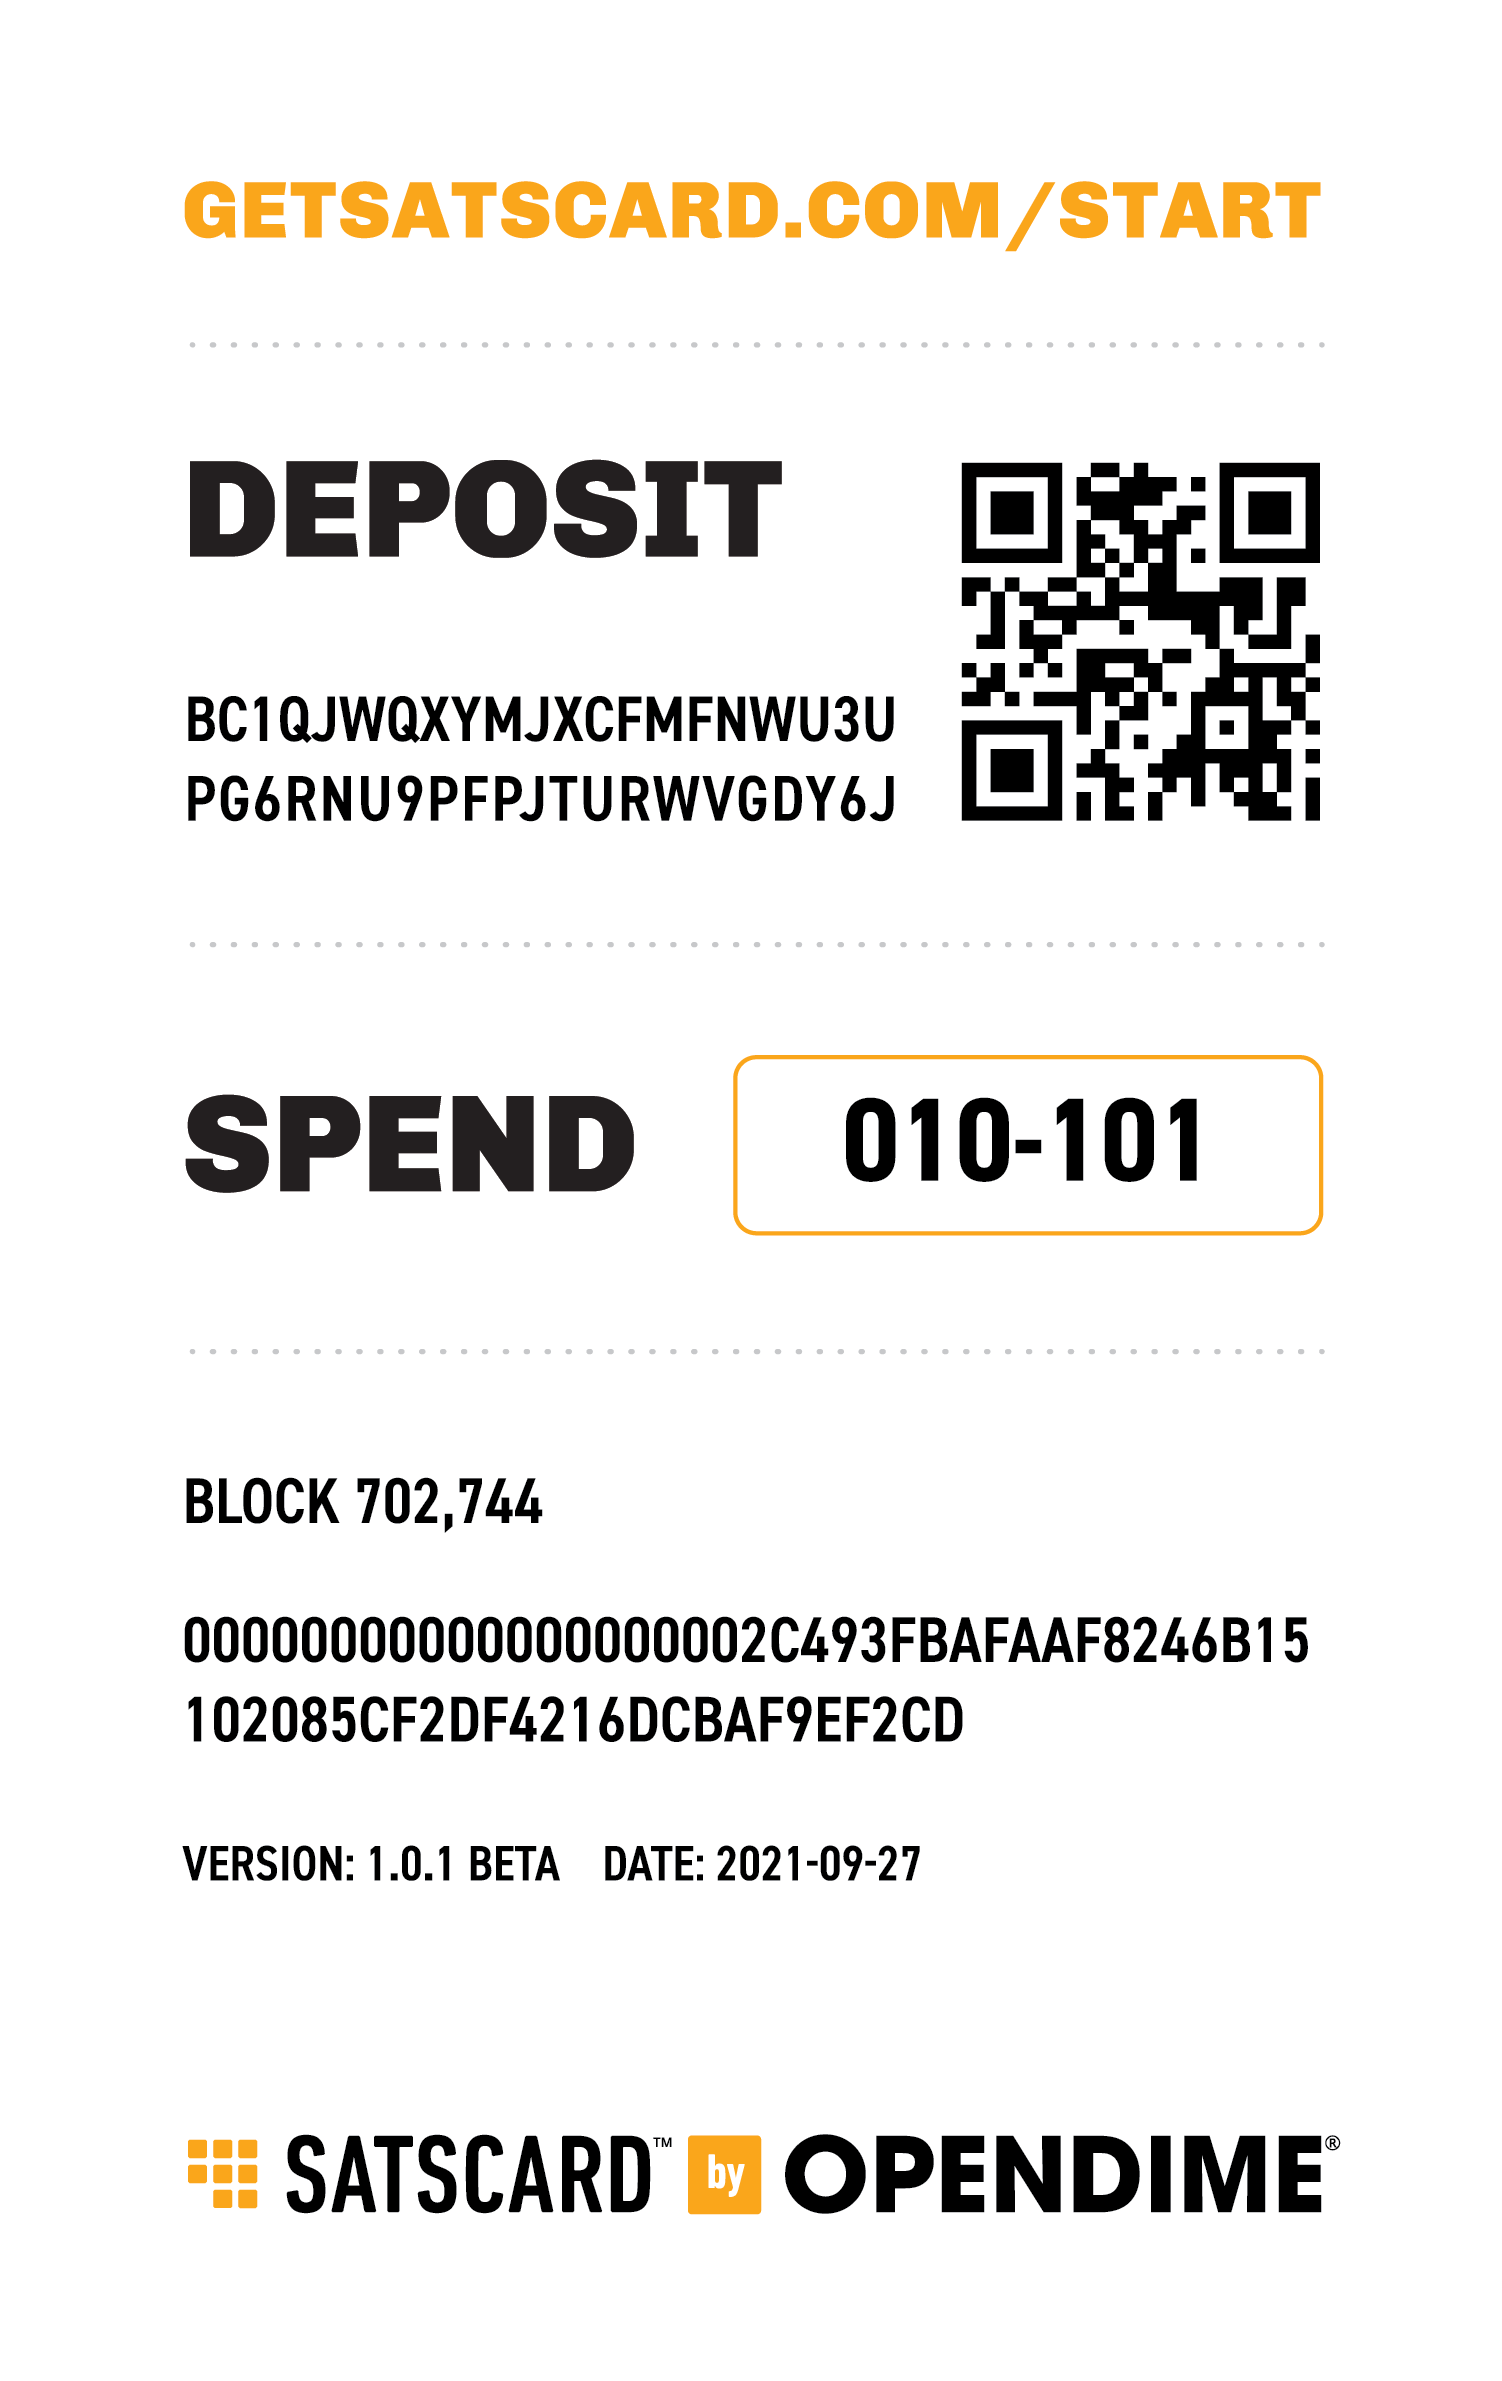 Example of SATSCARD deposit QR code and spend code on the back of the card